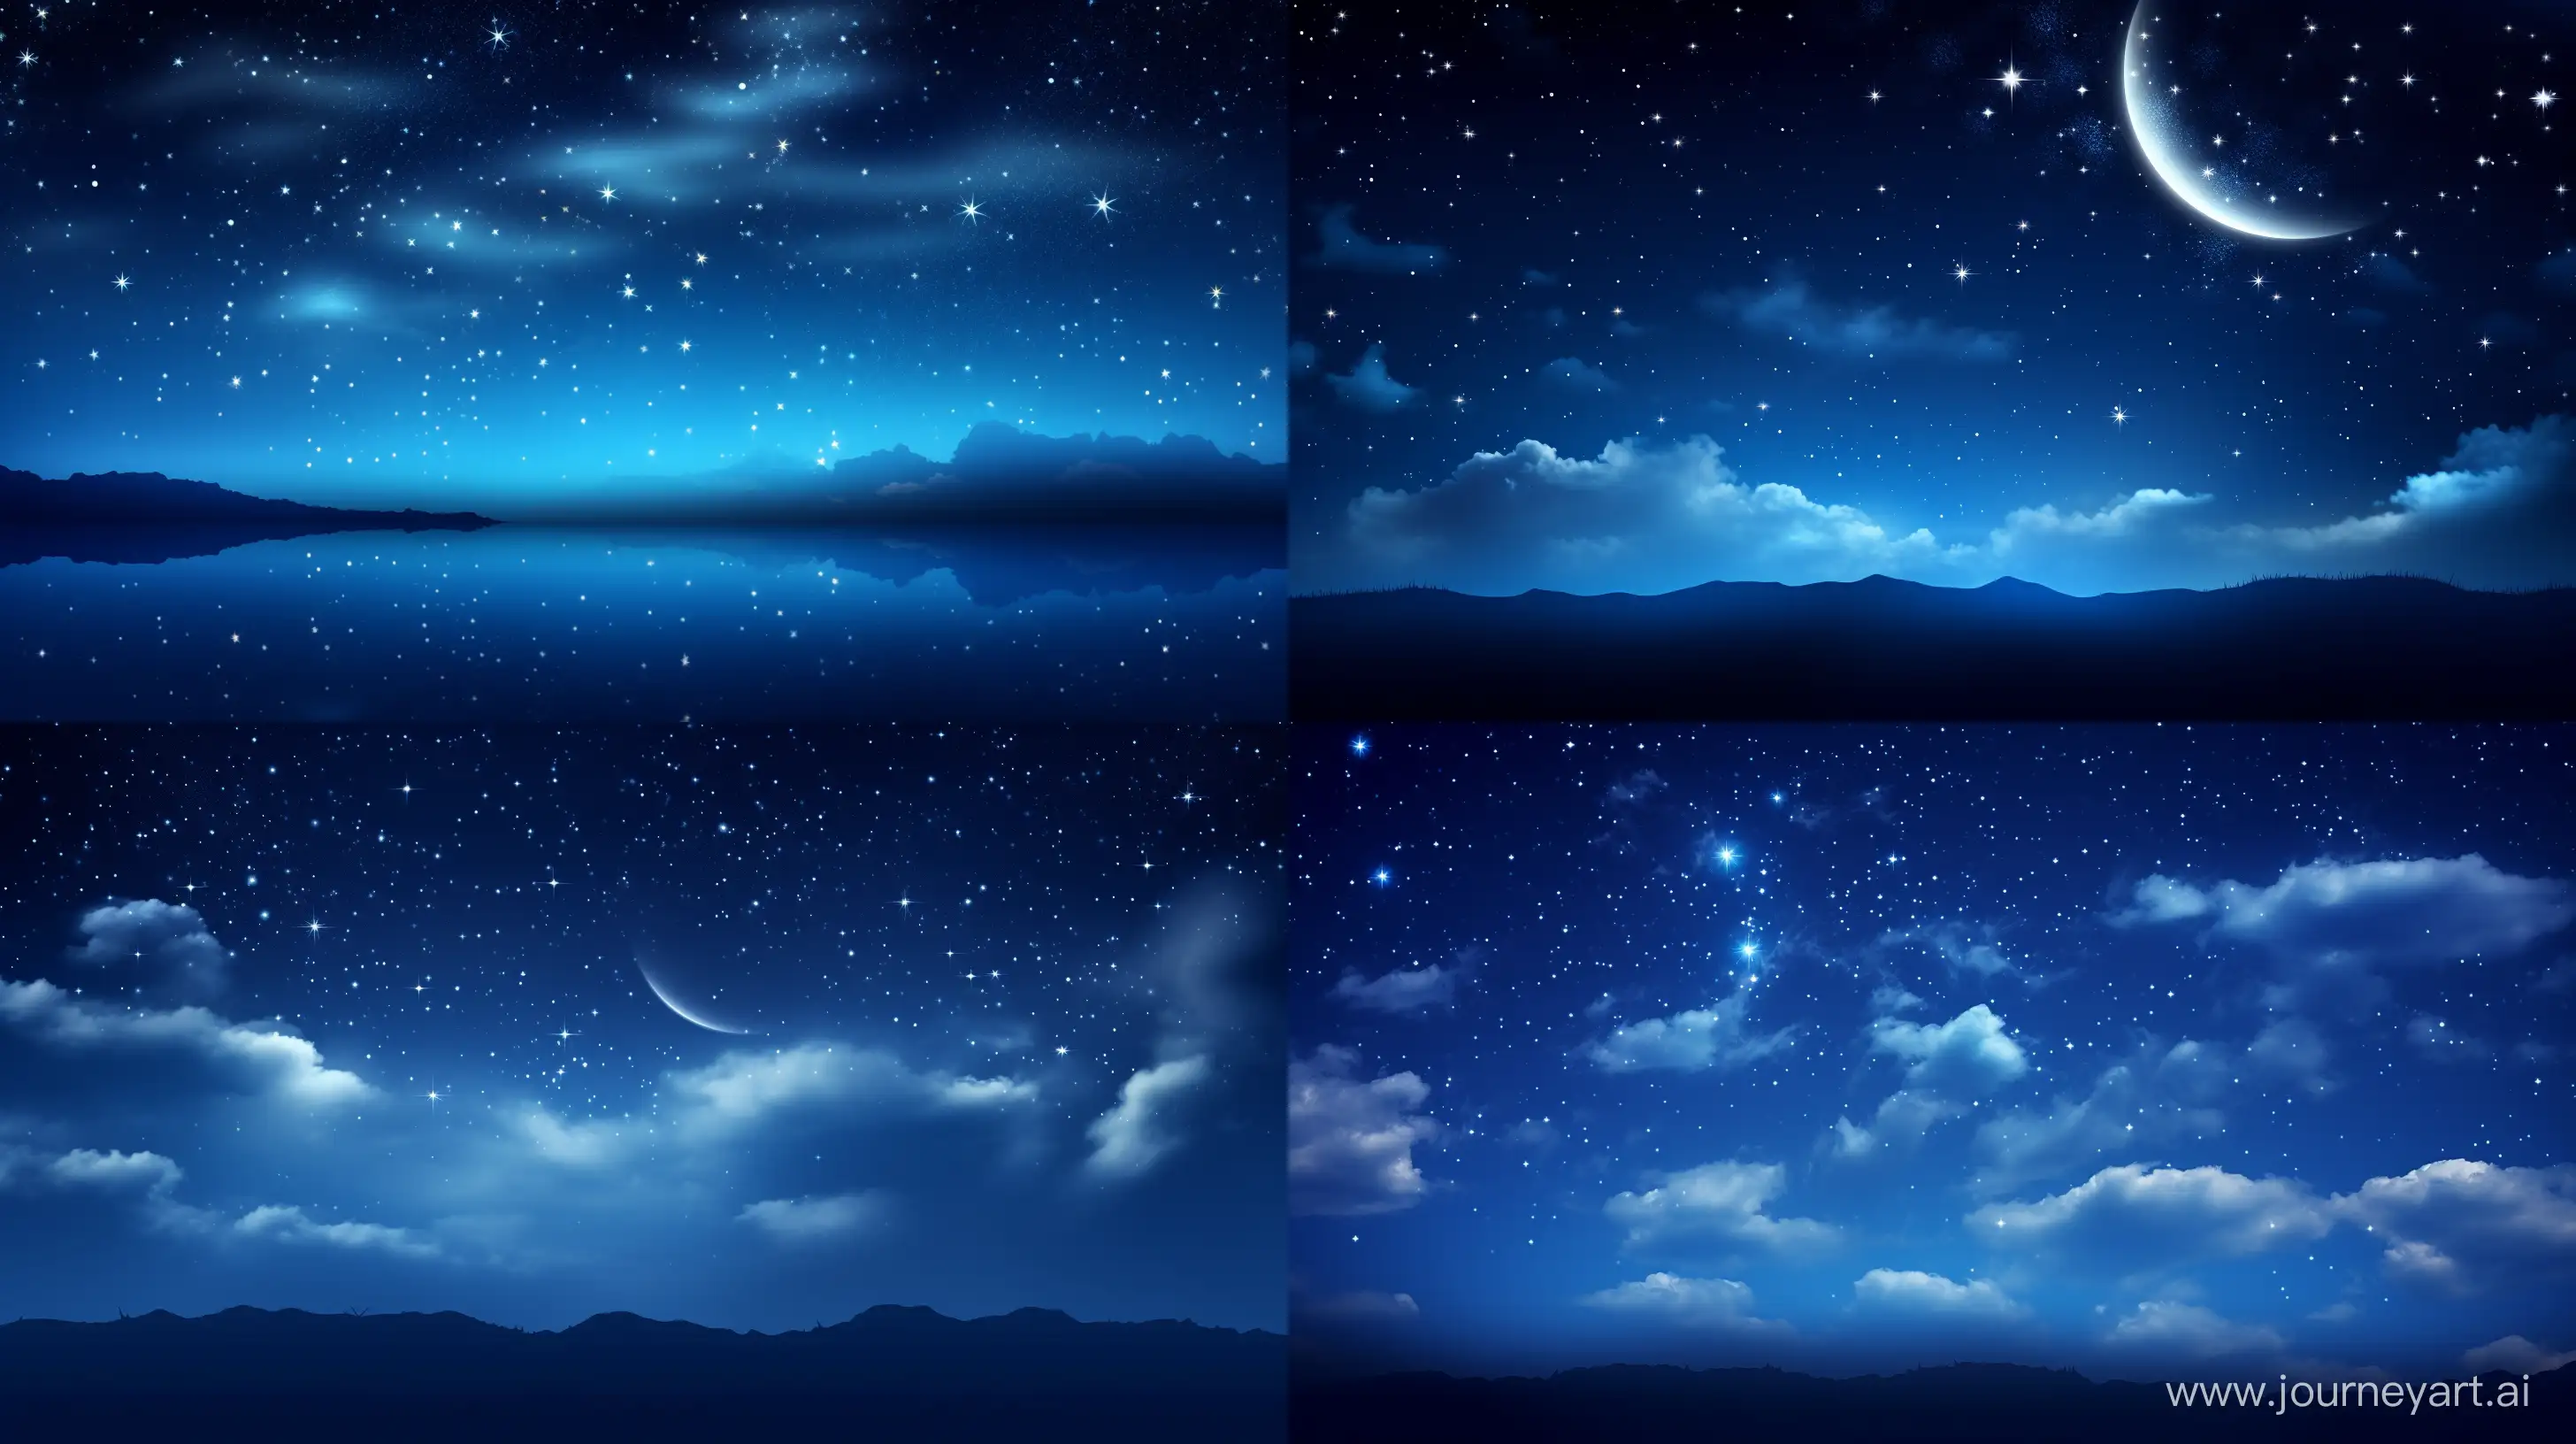 Mystical-Night-Sky-with-Crescent-Moon-and-Twinkling-Stars